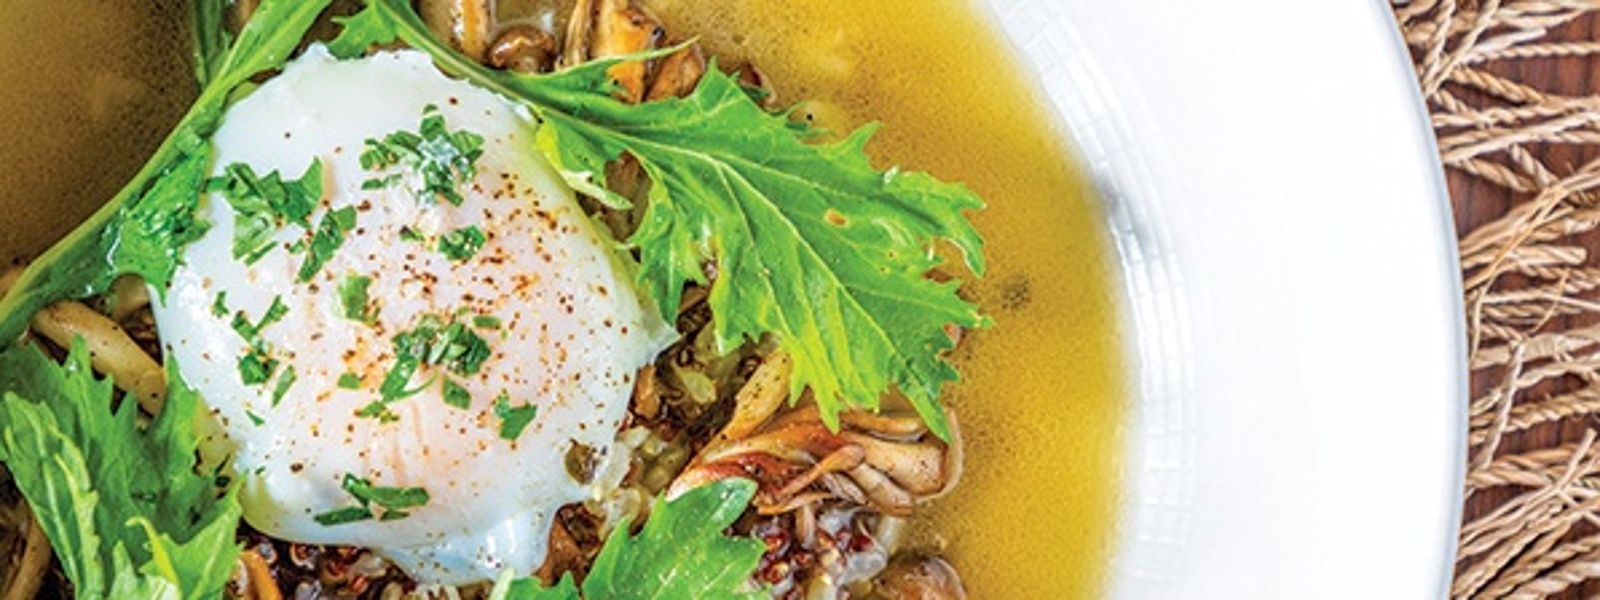 Savory grains with poached egg 